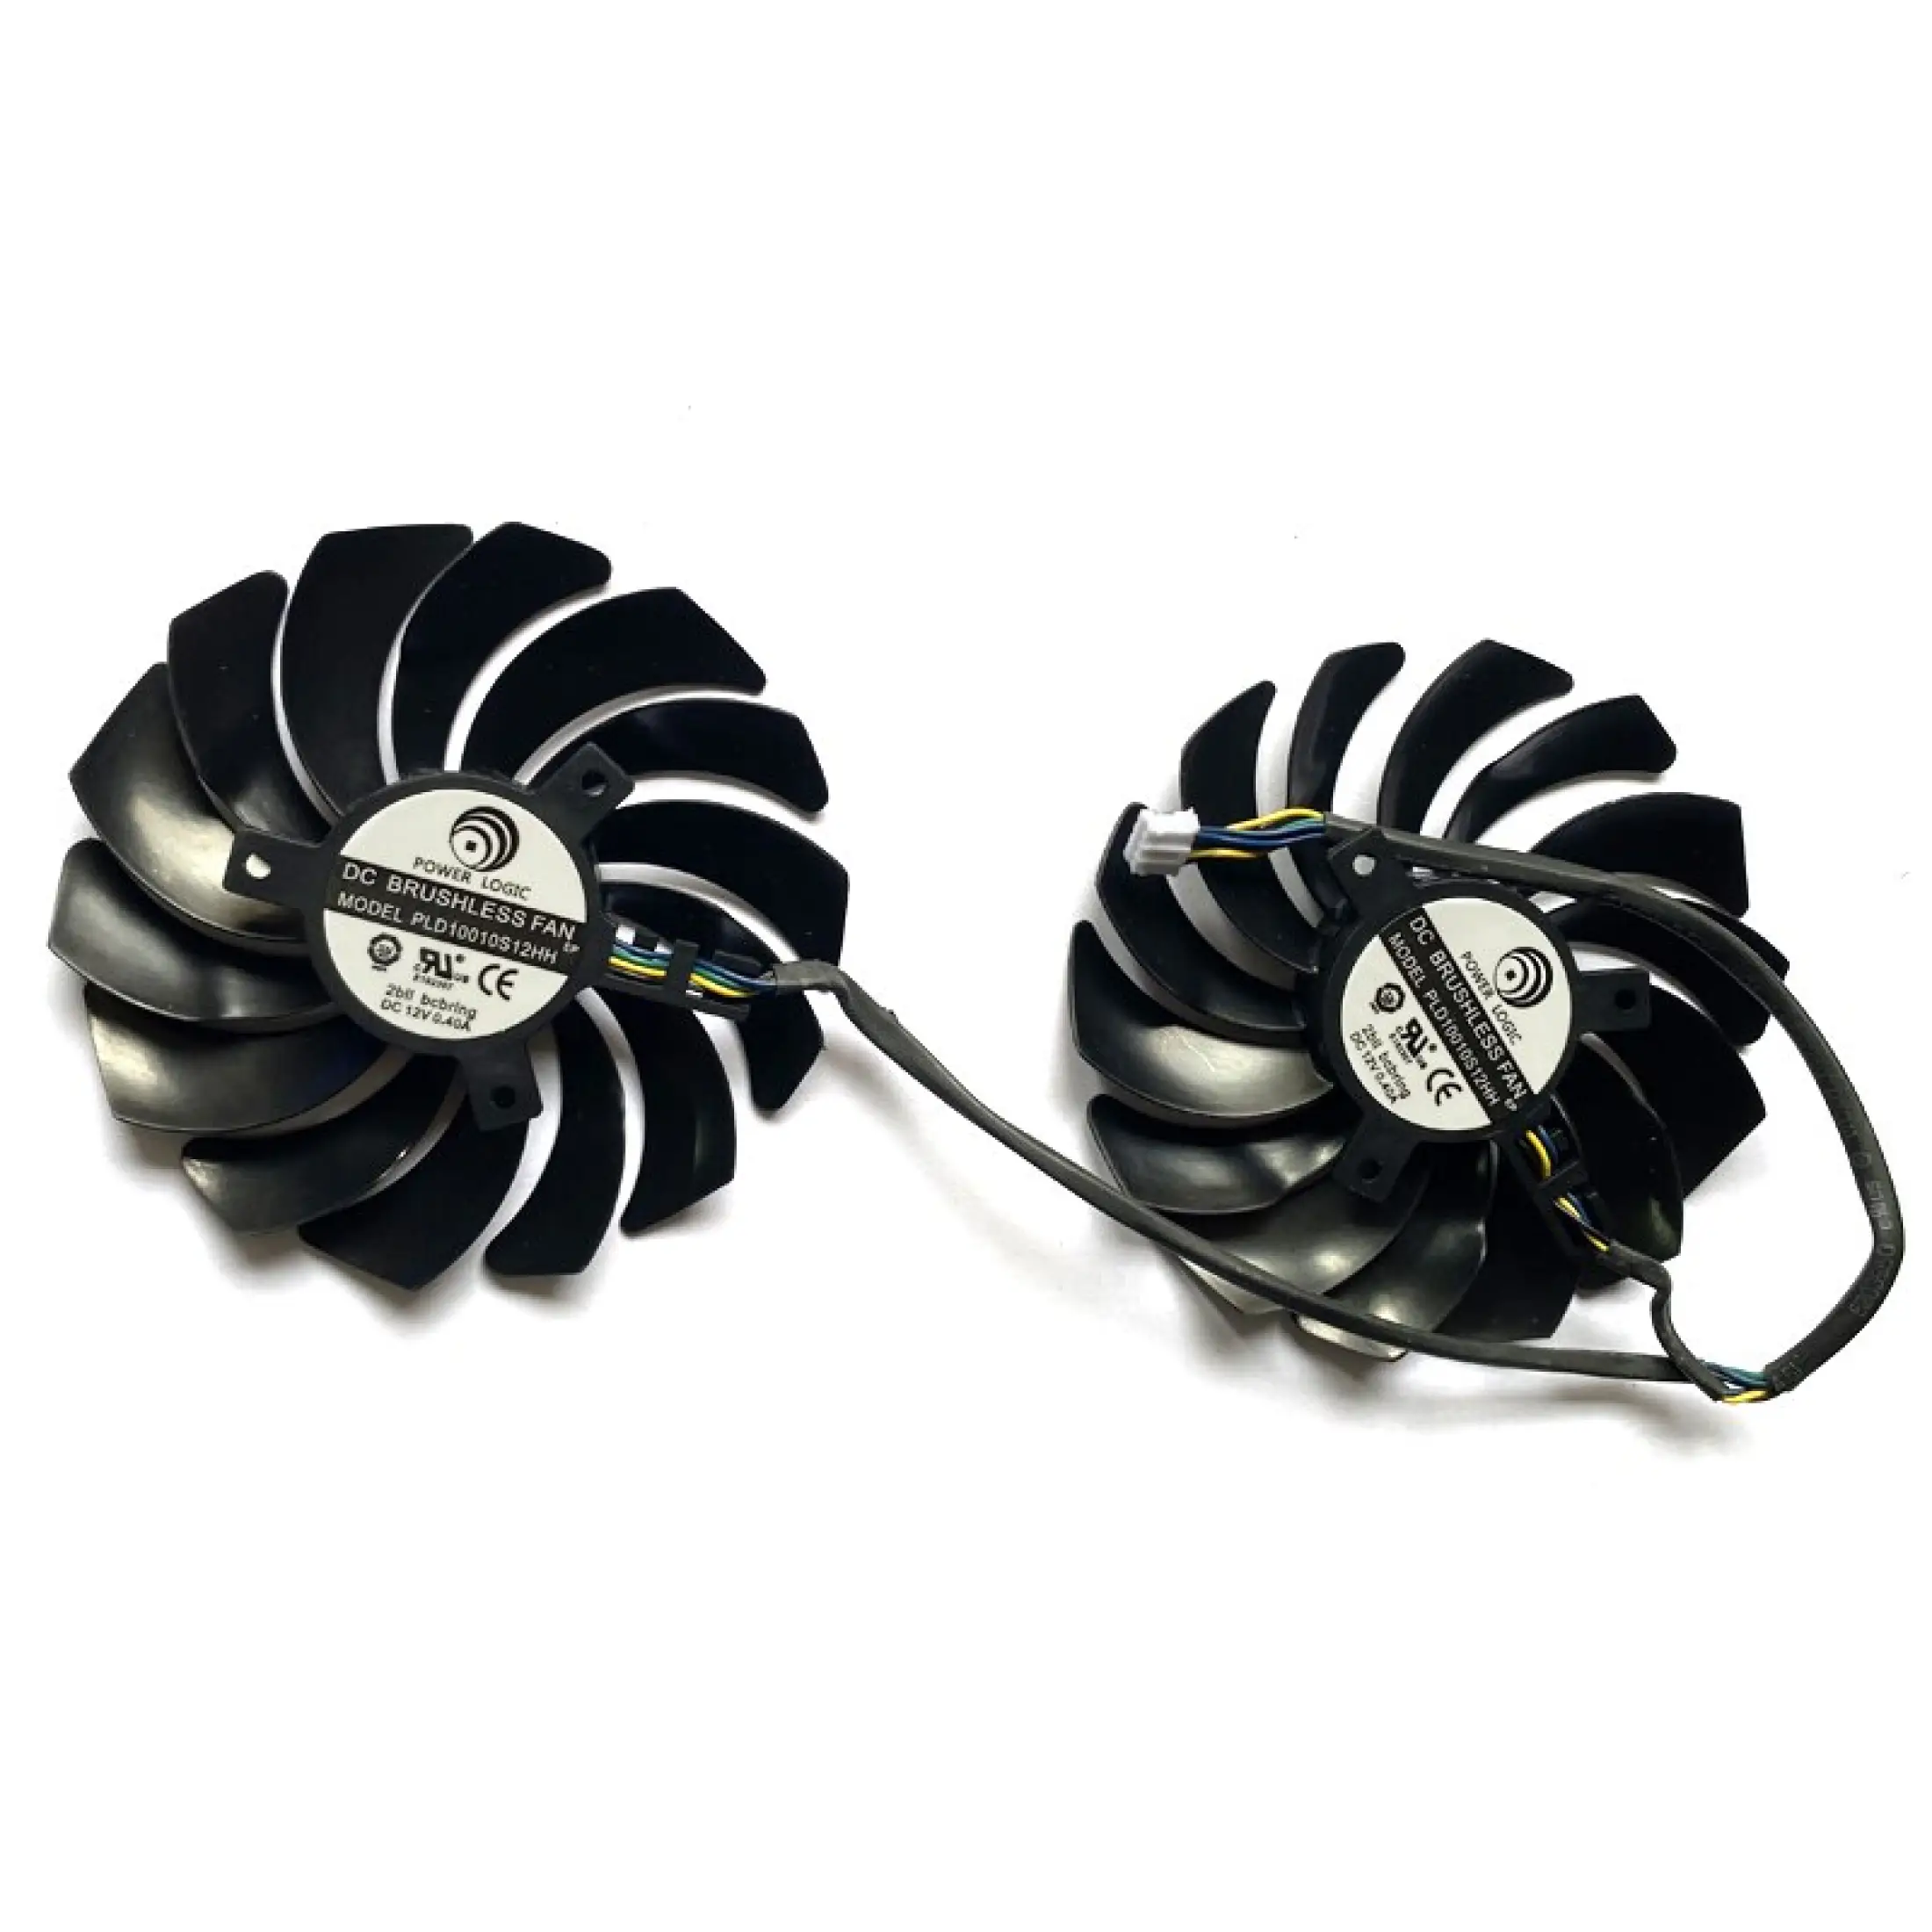 NEW 95MM PLD10010S12HH 4PIN GTX980 GPU FAN For MSI Radeon R9 380 Armor 2X  GTX 1060 970 RX580 Graphics Video Card Cooling Fans | Lazada Singapore